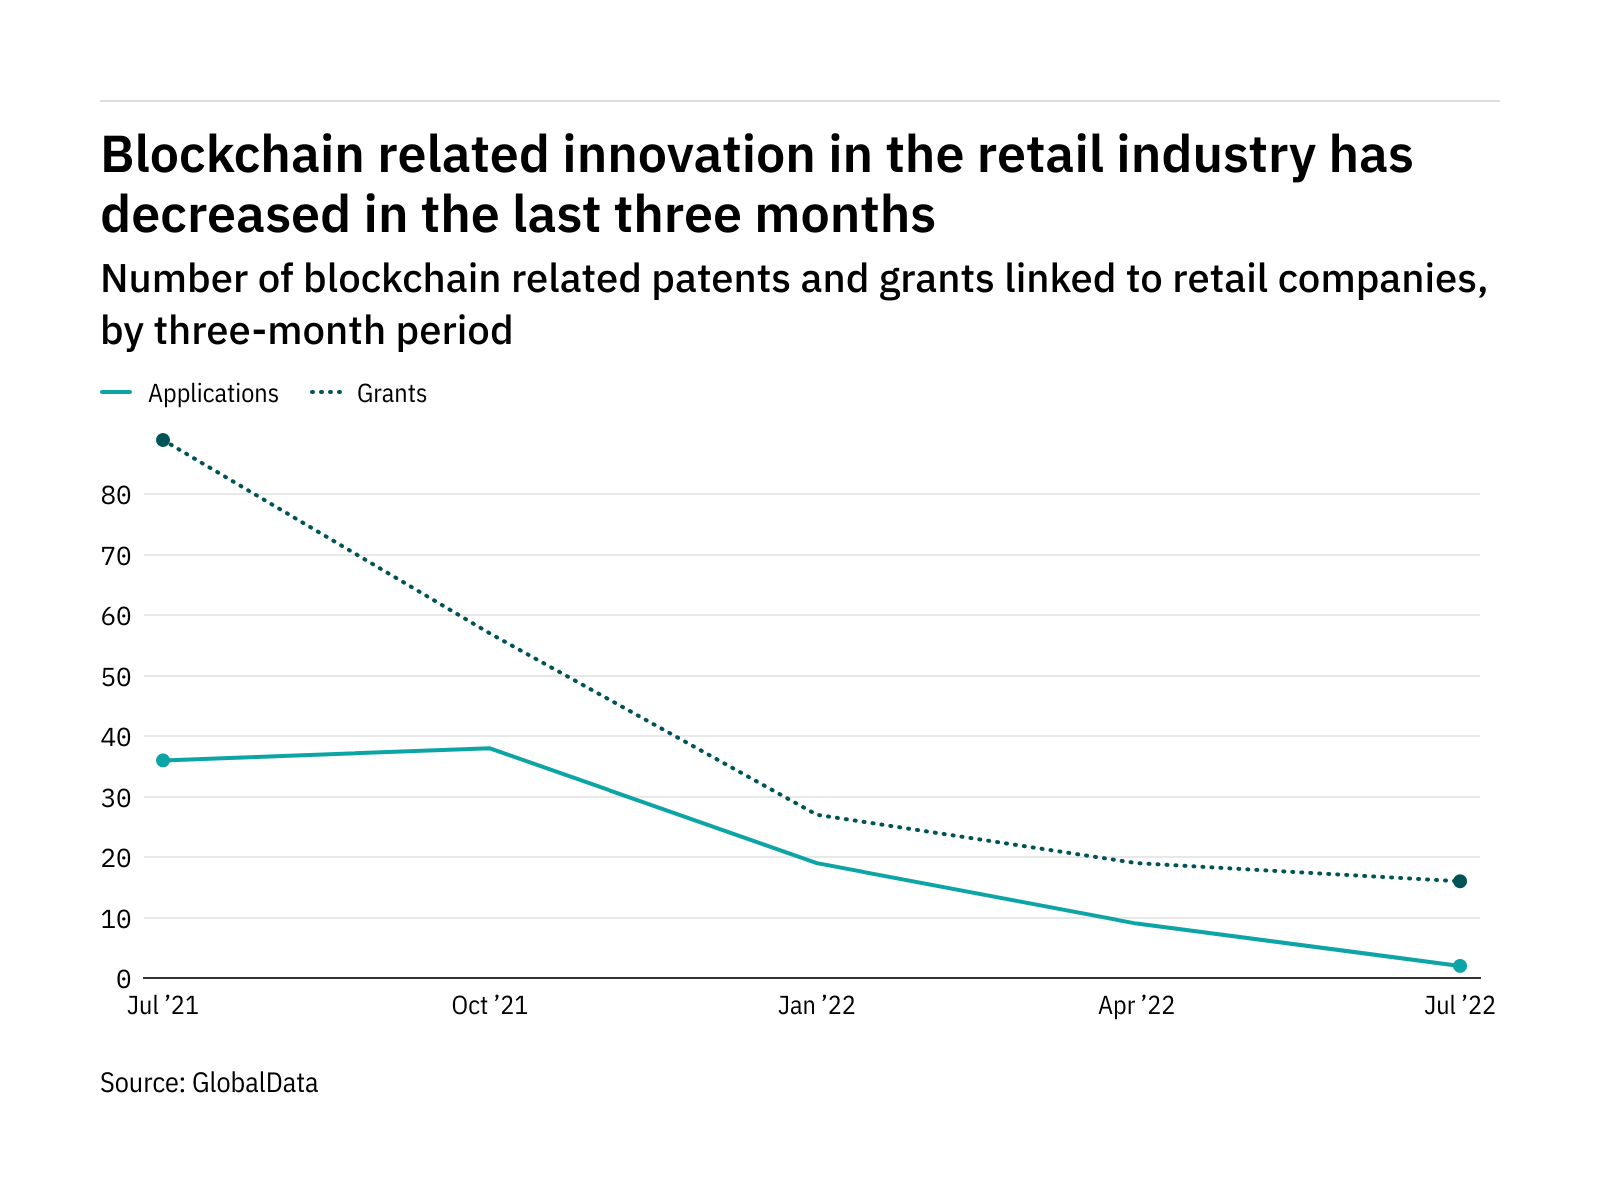 Blockchain innovation among retail industry companies has dropped off in the last three months